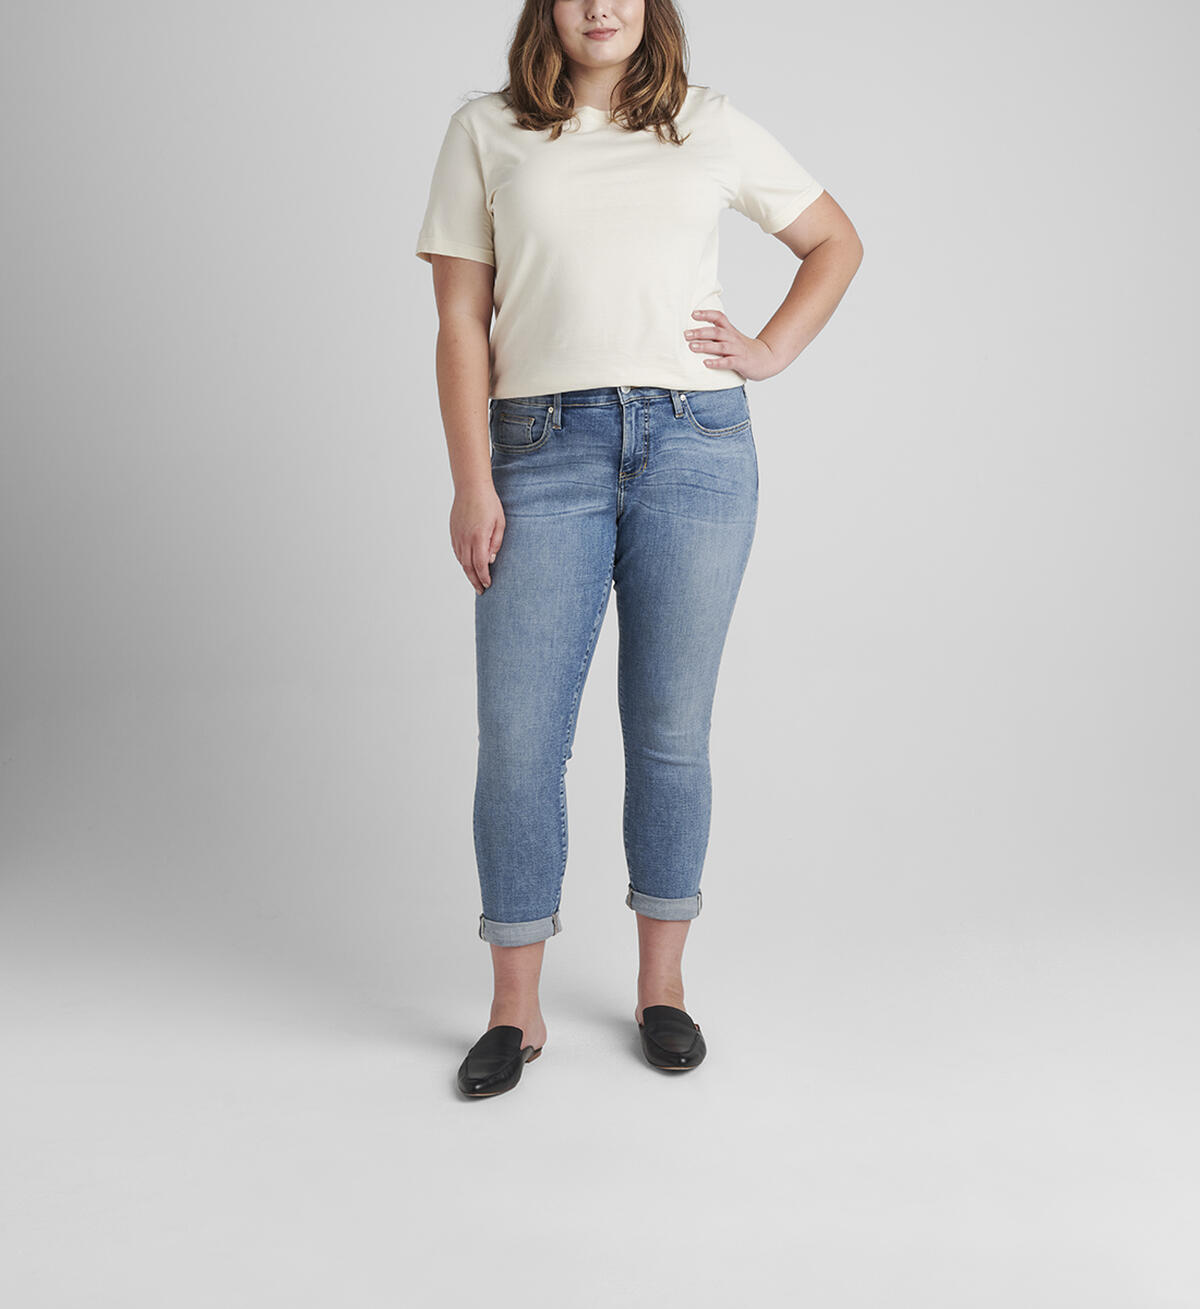 Carter Mid Rise Girlfriend Jeans Plus Size, , hi-res image number 0